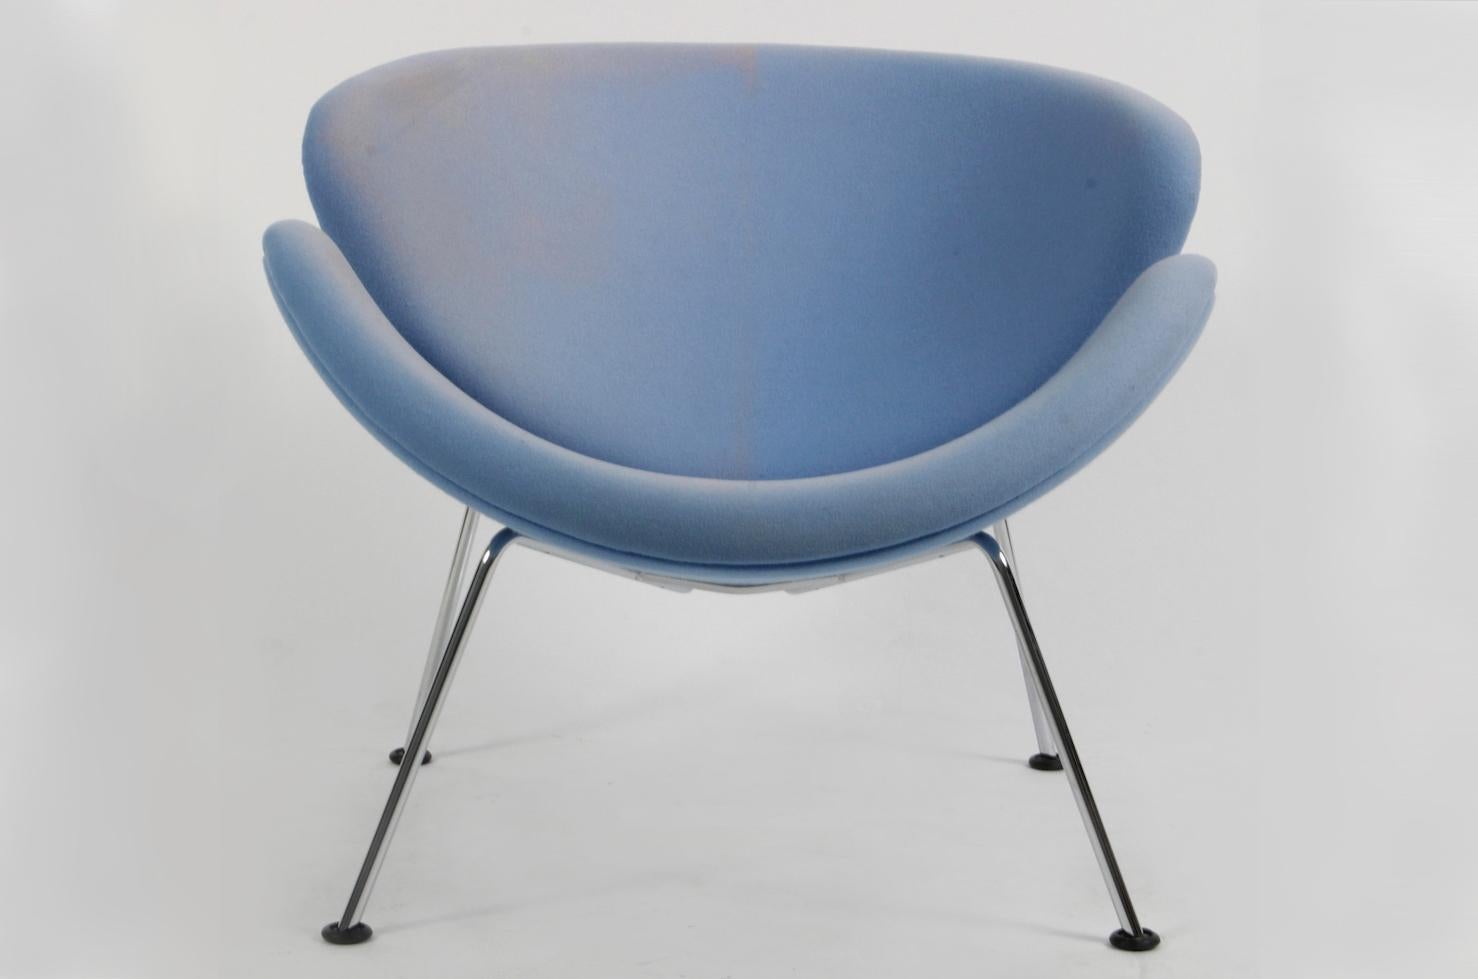 Pierre Paulin F437 orange slice armchair with chromed steel frame, fitted with two shells in full-padded light blue wool fabric.
This item is in original condition, can be sold as it is or fully restored, the price shown is in original condition.